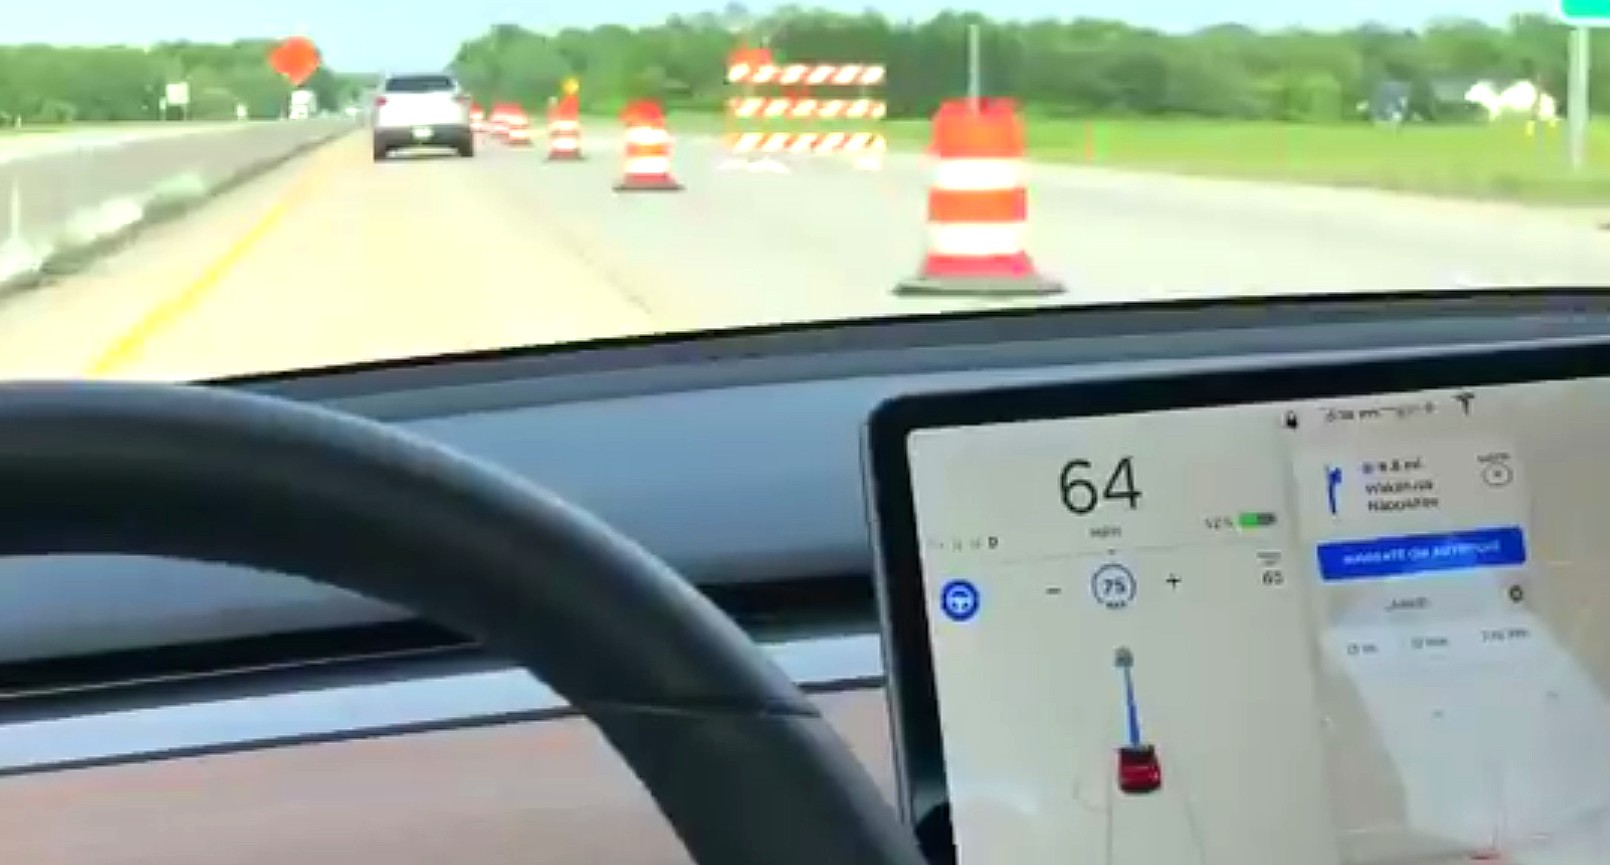 Tesla Navigate on Autopilot seamlessly handles construction zone with no lane lines